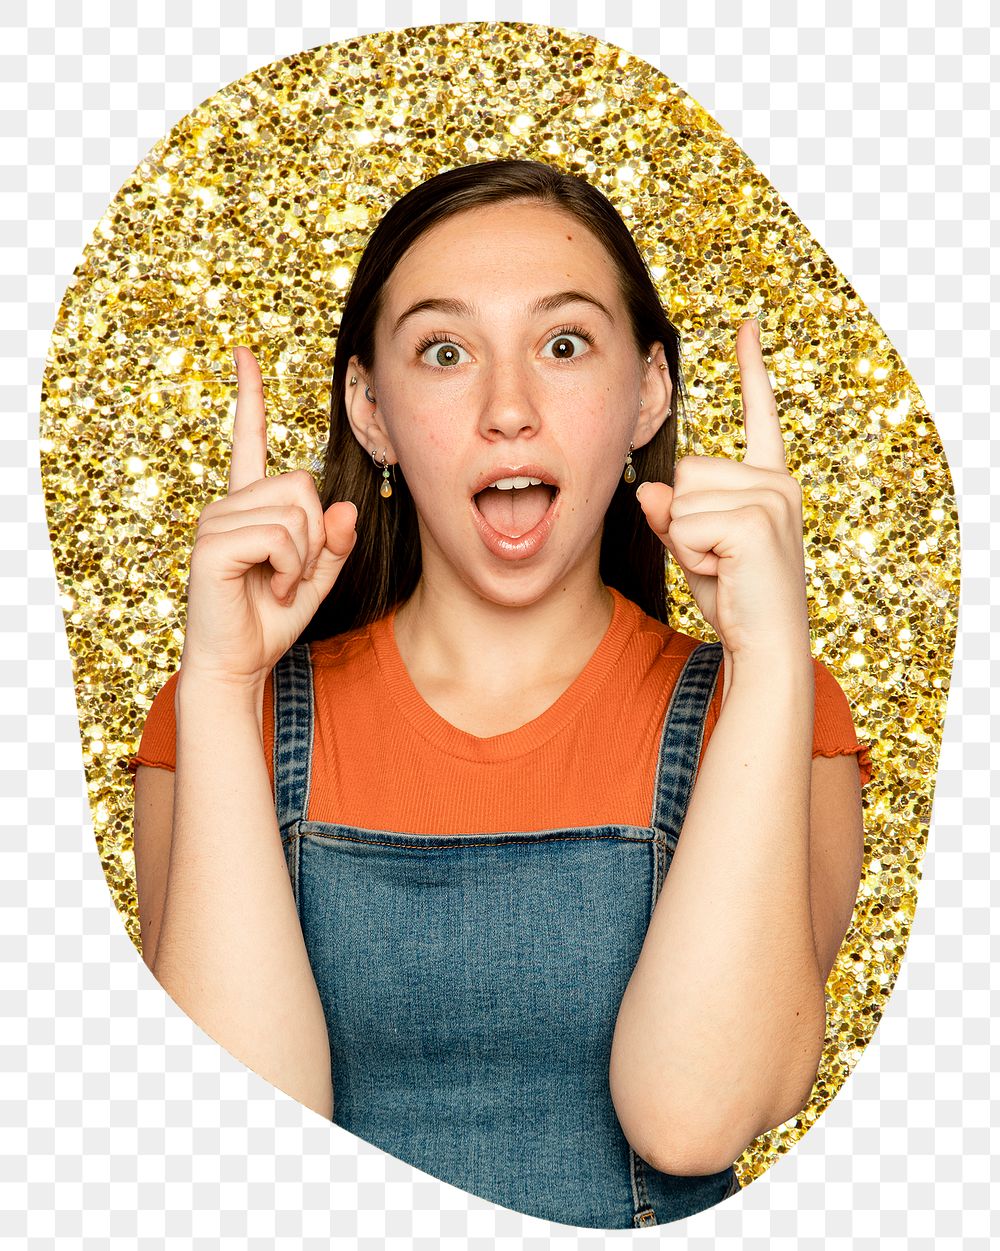 Png young woman pointing up sticker, gold glitter blob shape, transparent background